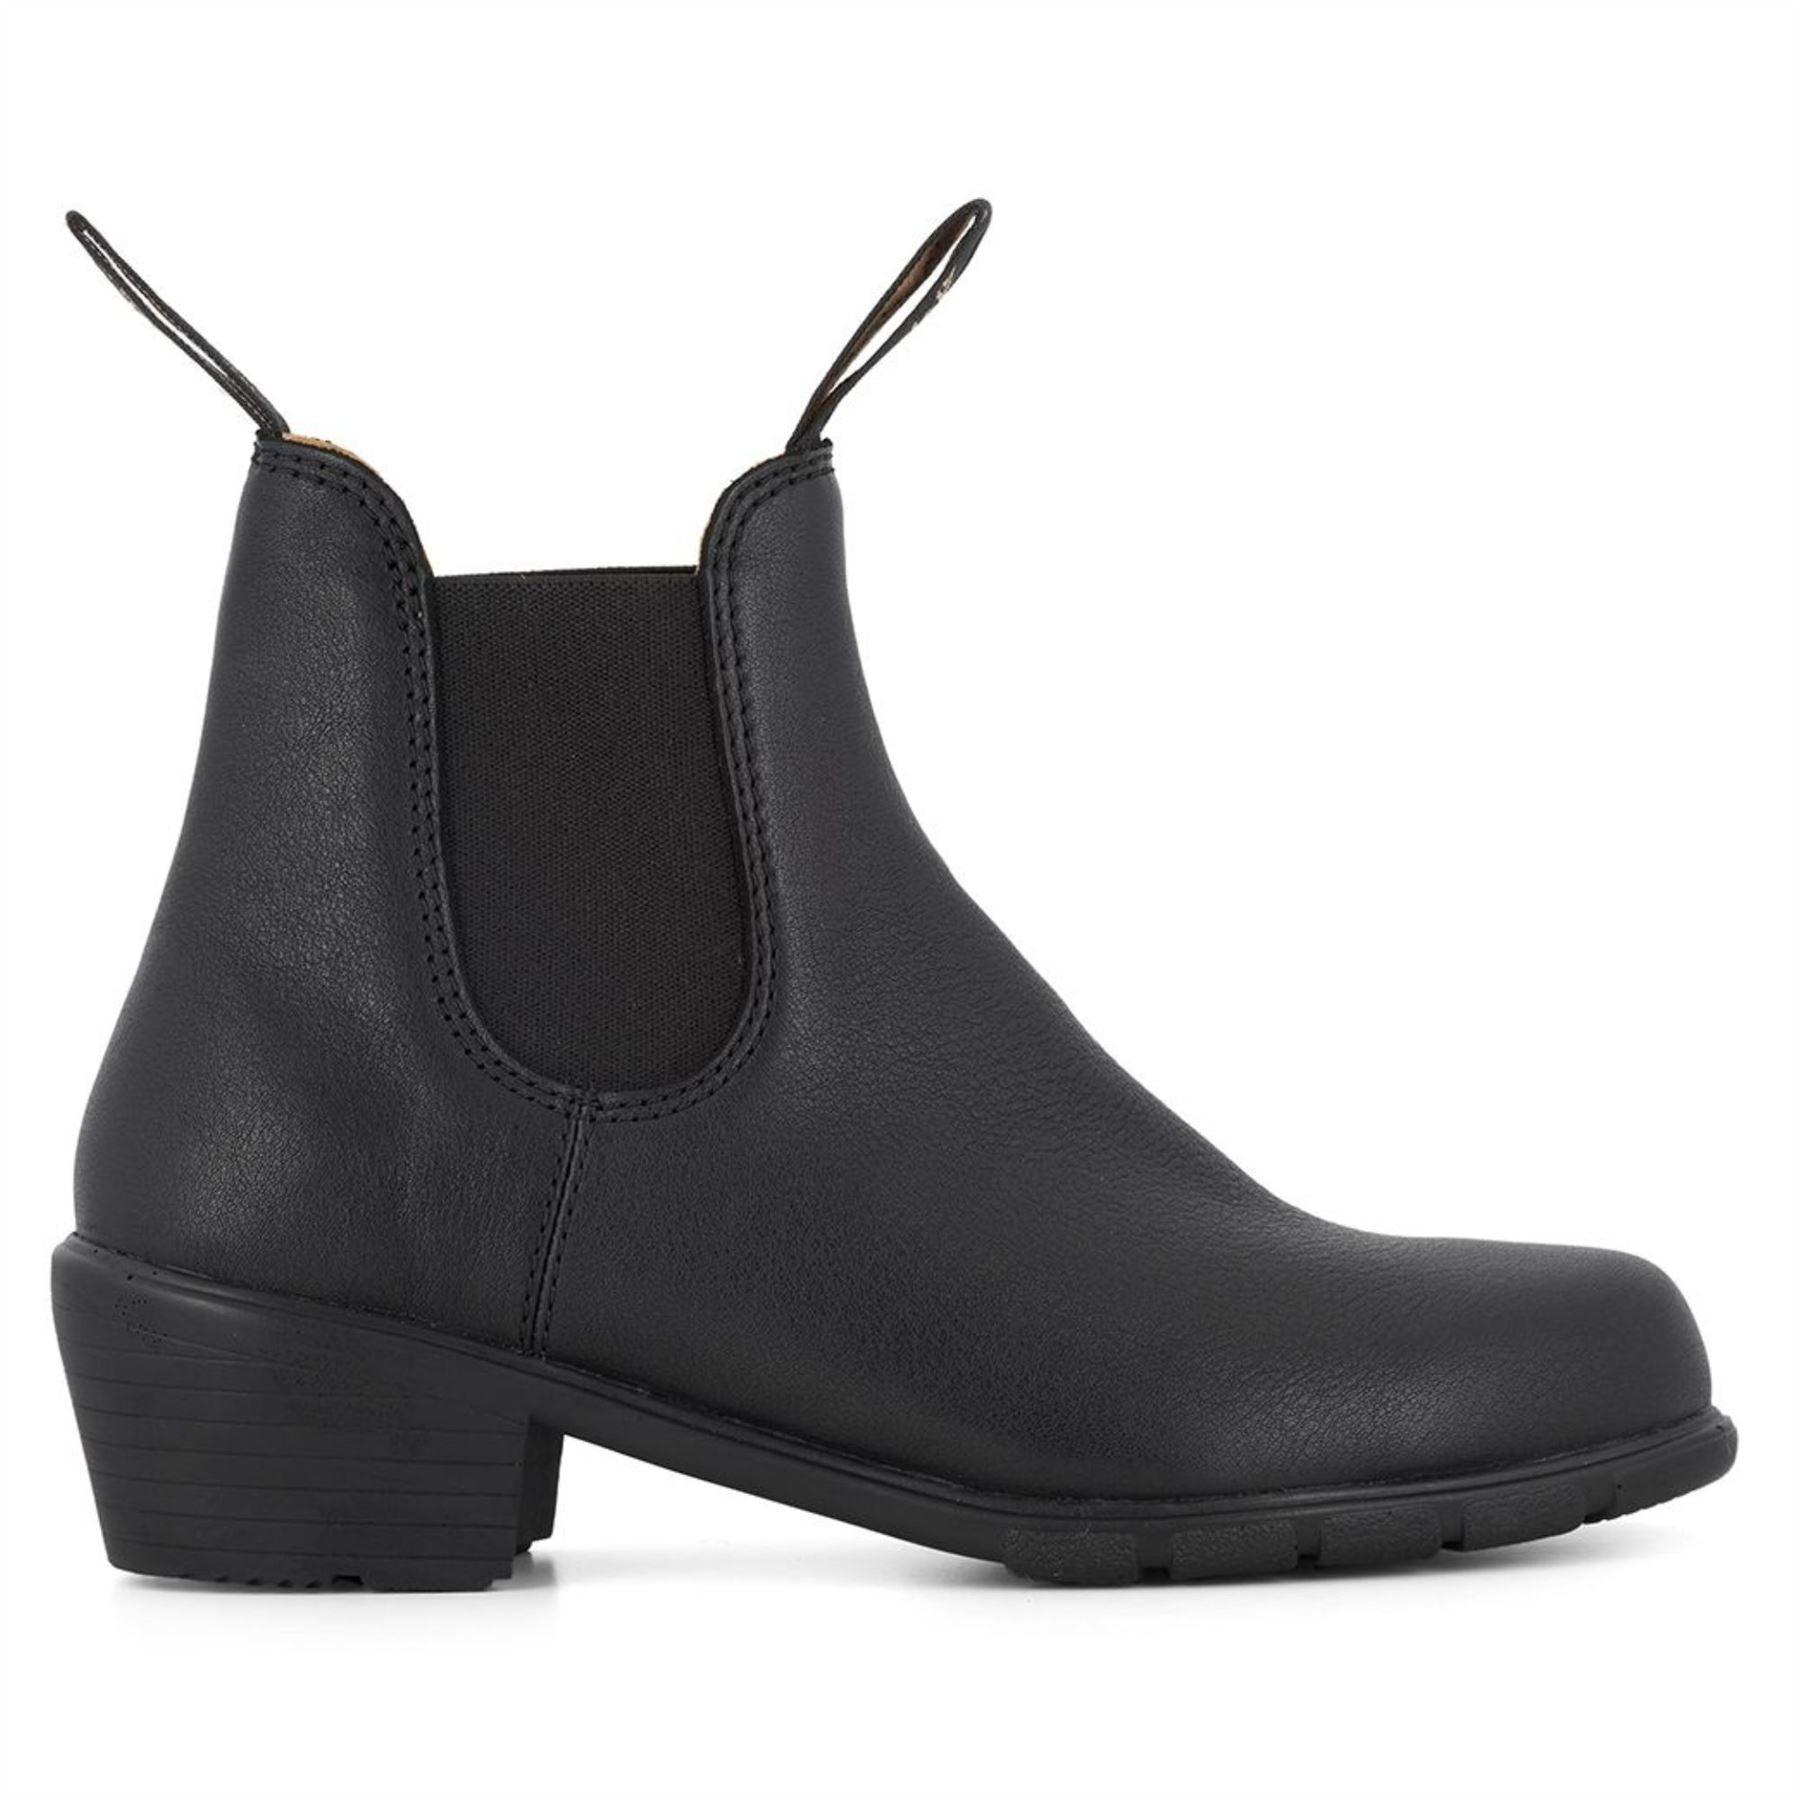 Blundstone 1671 Womens Black Leather Chelsea Boots Elasticated Ankle Classic - Knighthood Store